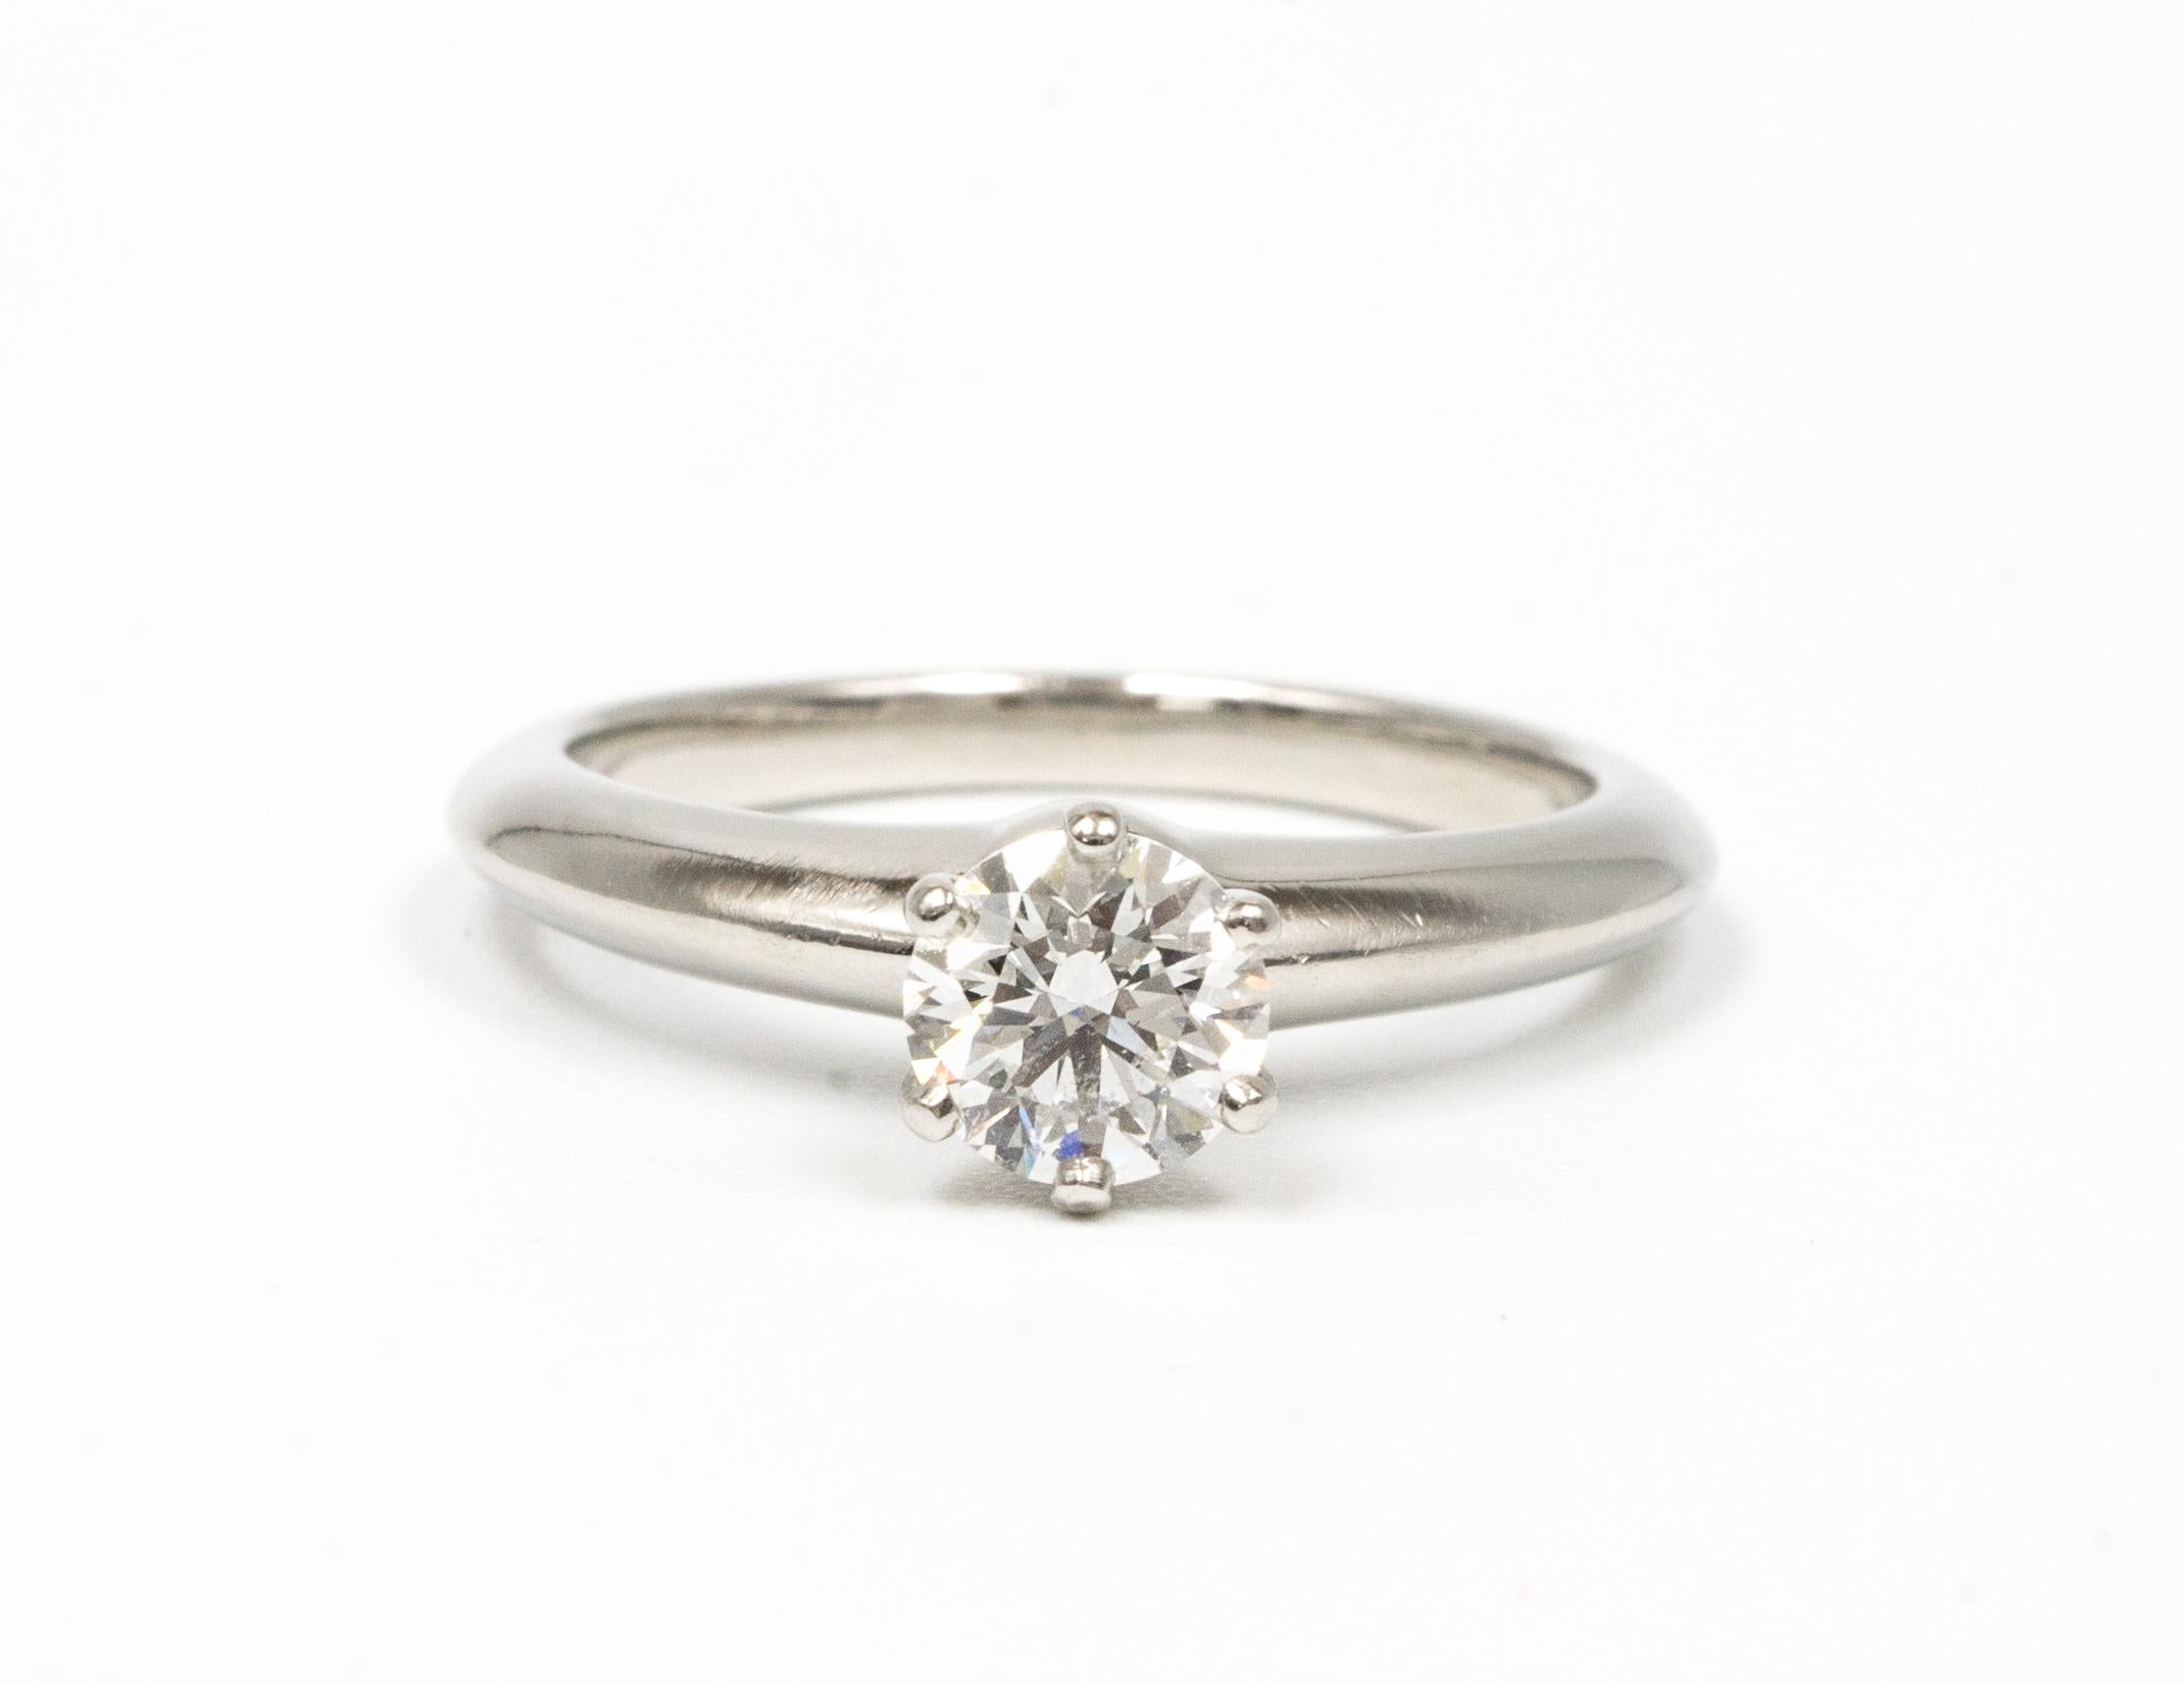 Tiffany & Co. Diamond Engagement Solitaire signed by Tiffany & Co. featuring a .66 ct Center, graded by Tiffany H color , and SI1 Clarity.
In Platinum
Includes Original Tiffany Certificate and Box
Crown Inscription T&C L01140081 

Retail Approx